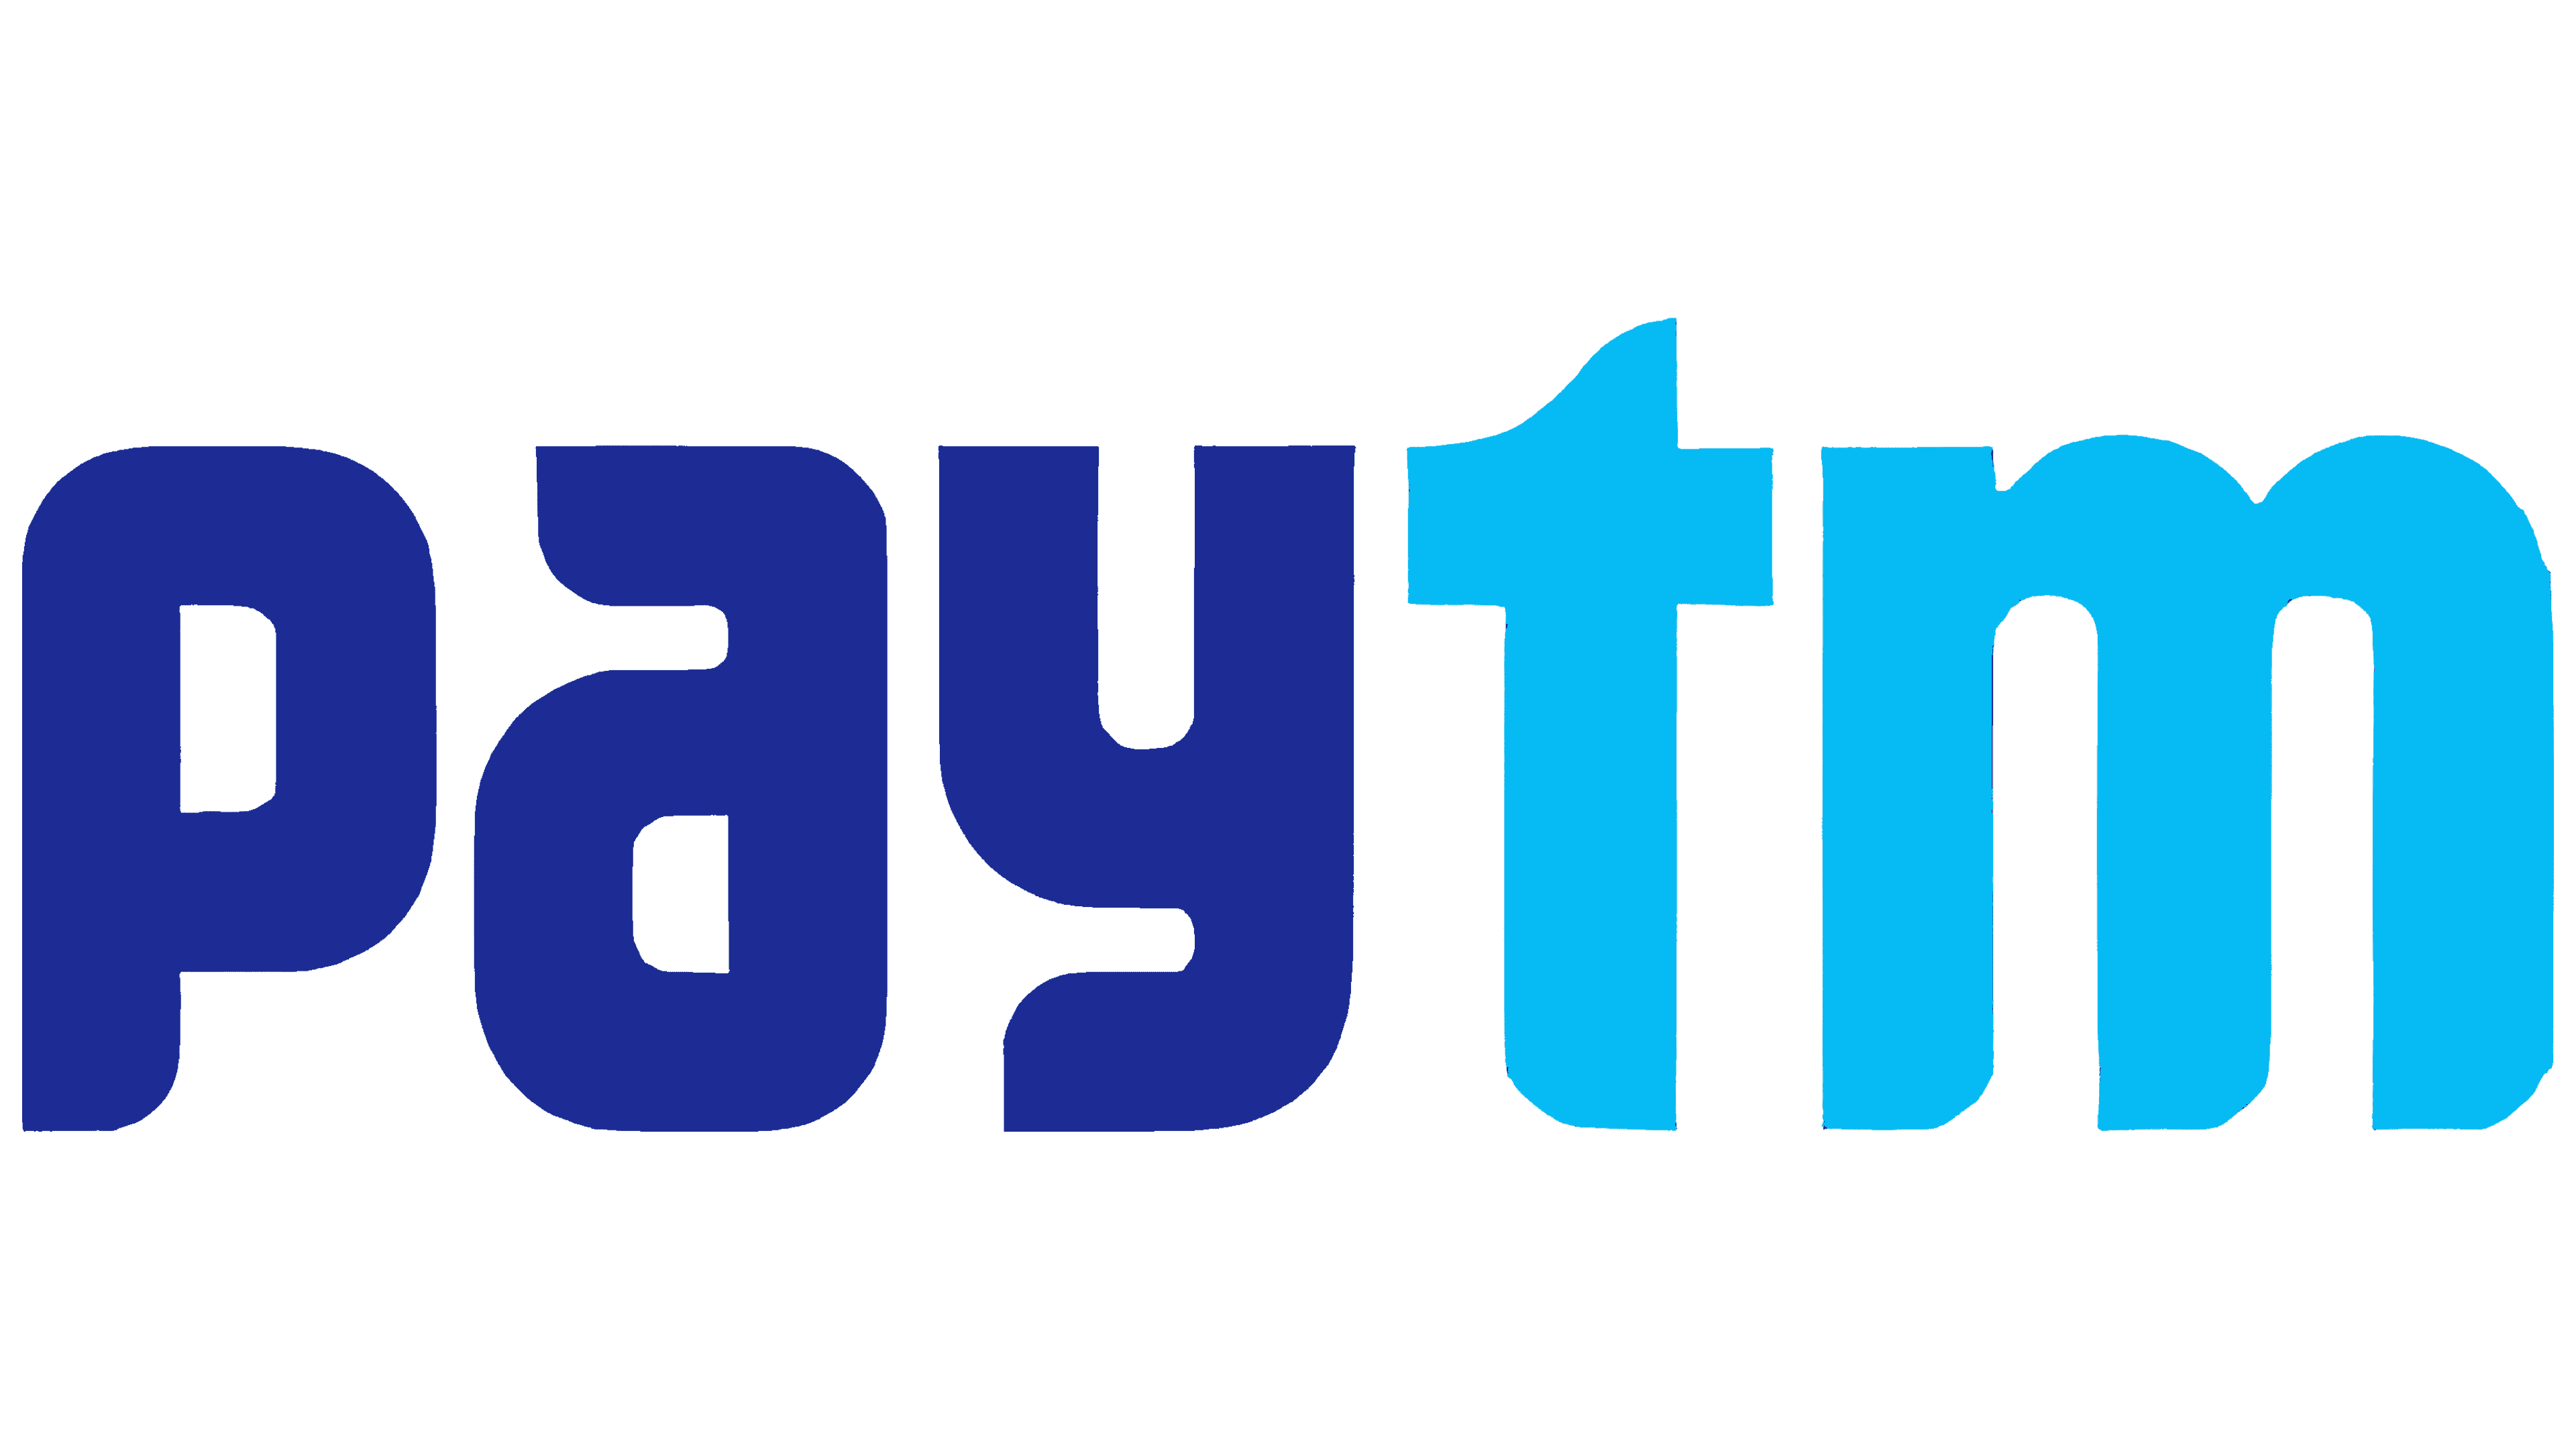 Cooperation with the company - Paytm